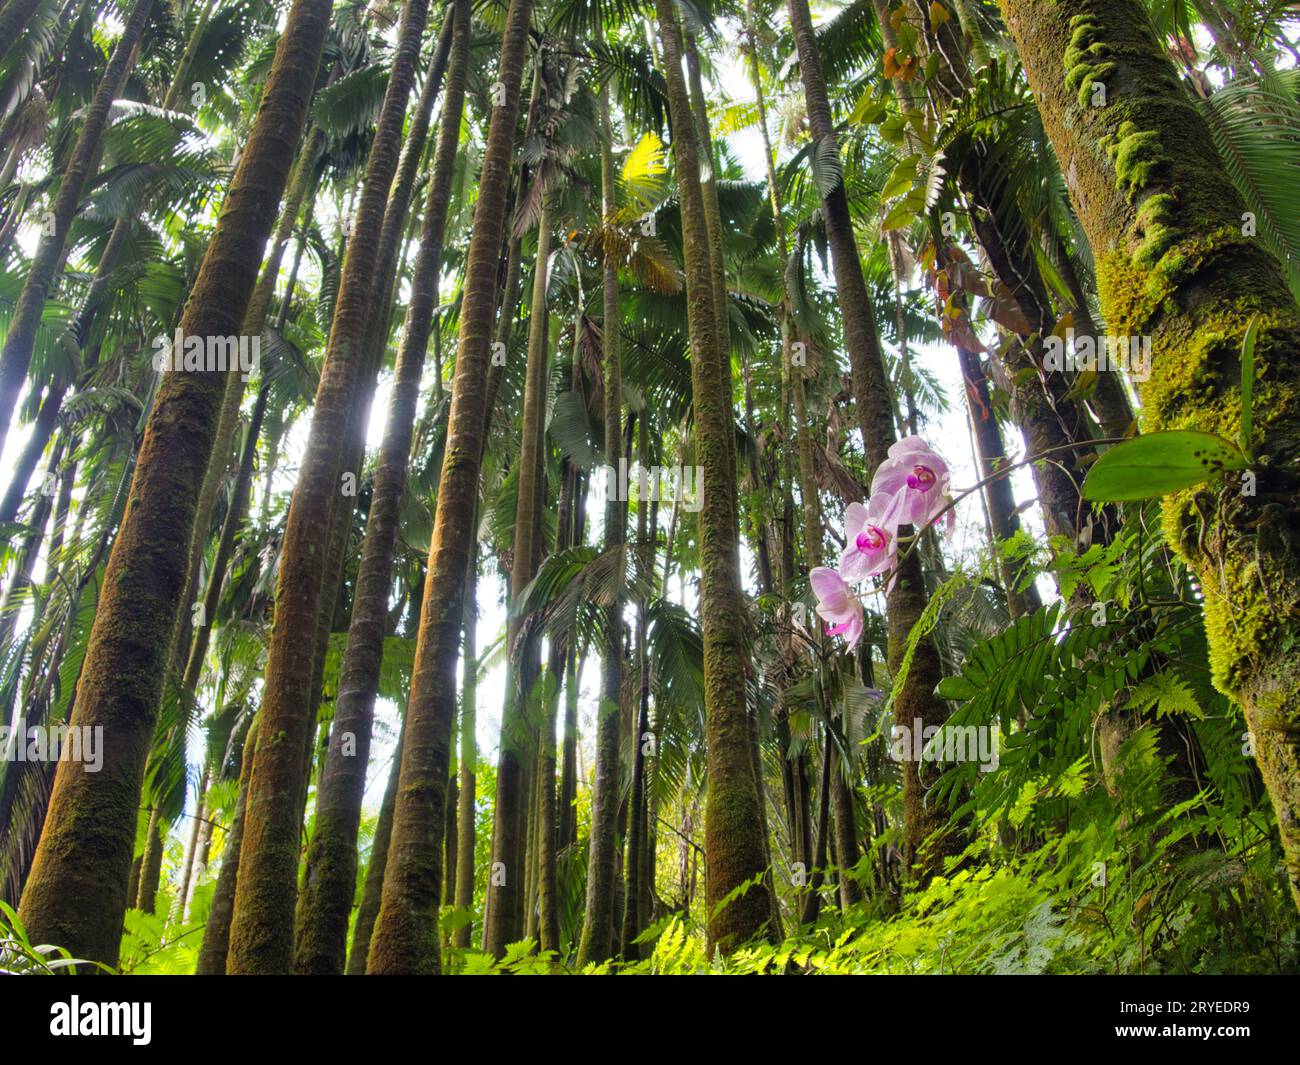 Palm tree forest with phalaenopsis orchid in Hilo, Hawaii botanical garden. Stock Photo